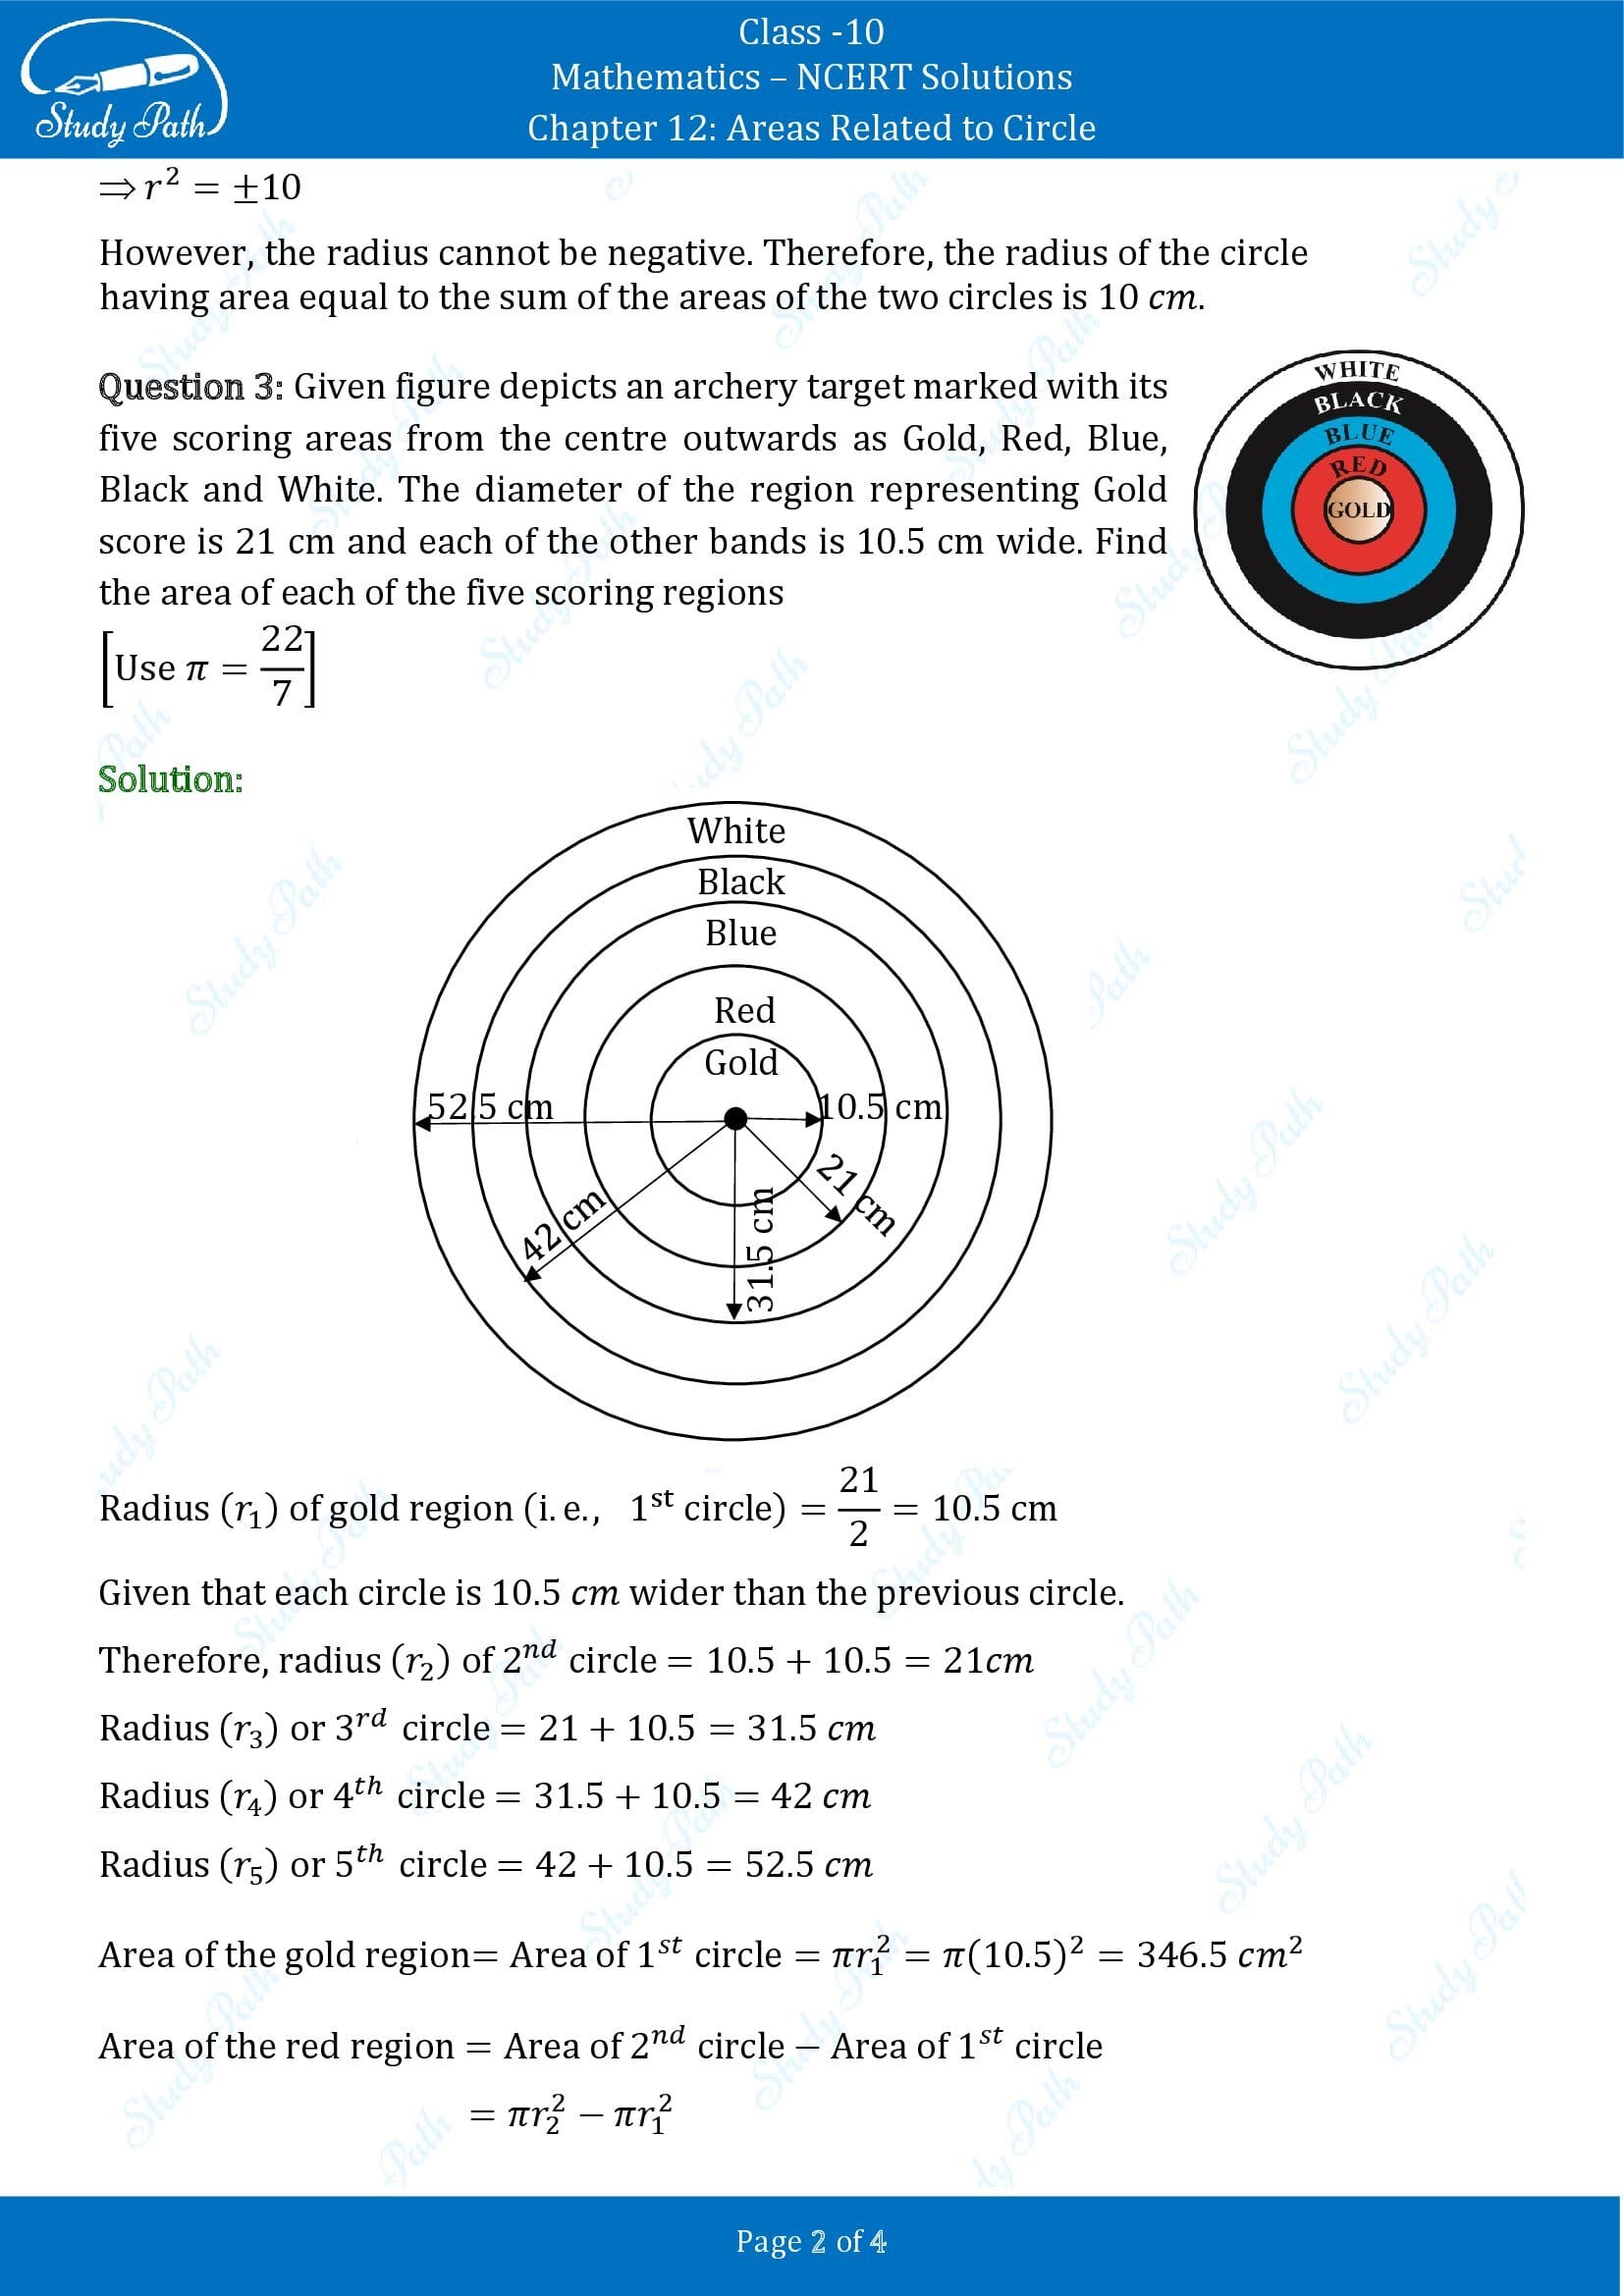 NCERT Solutions for Class 10 Maths Chapter 12 Areas Related to Circles Exercise 12.1 00002